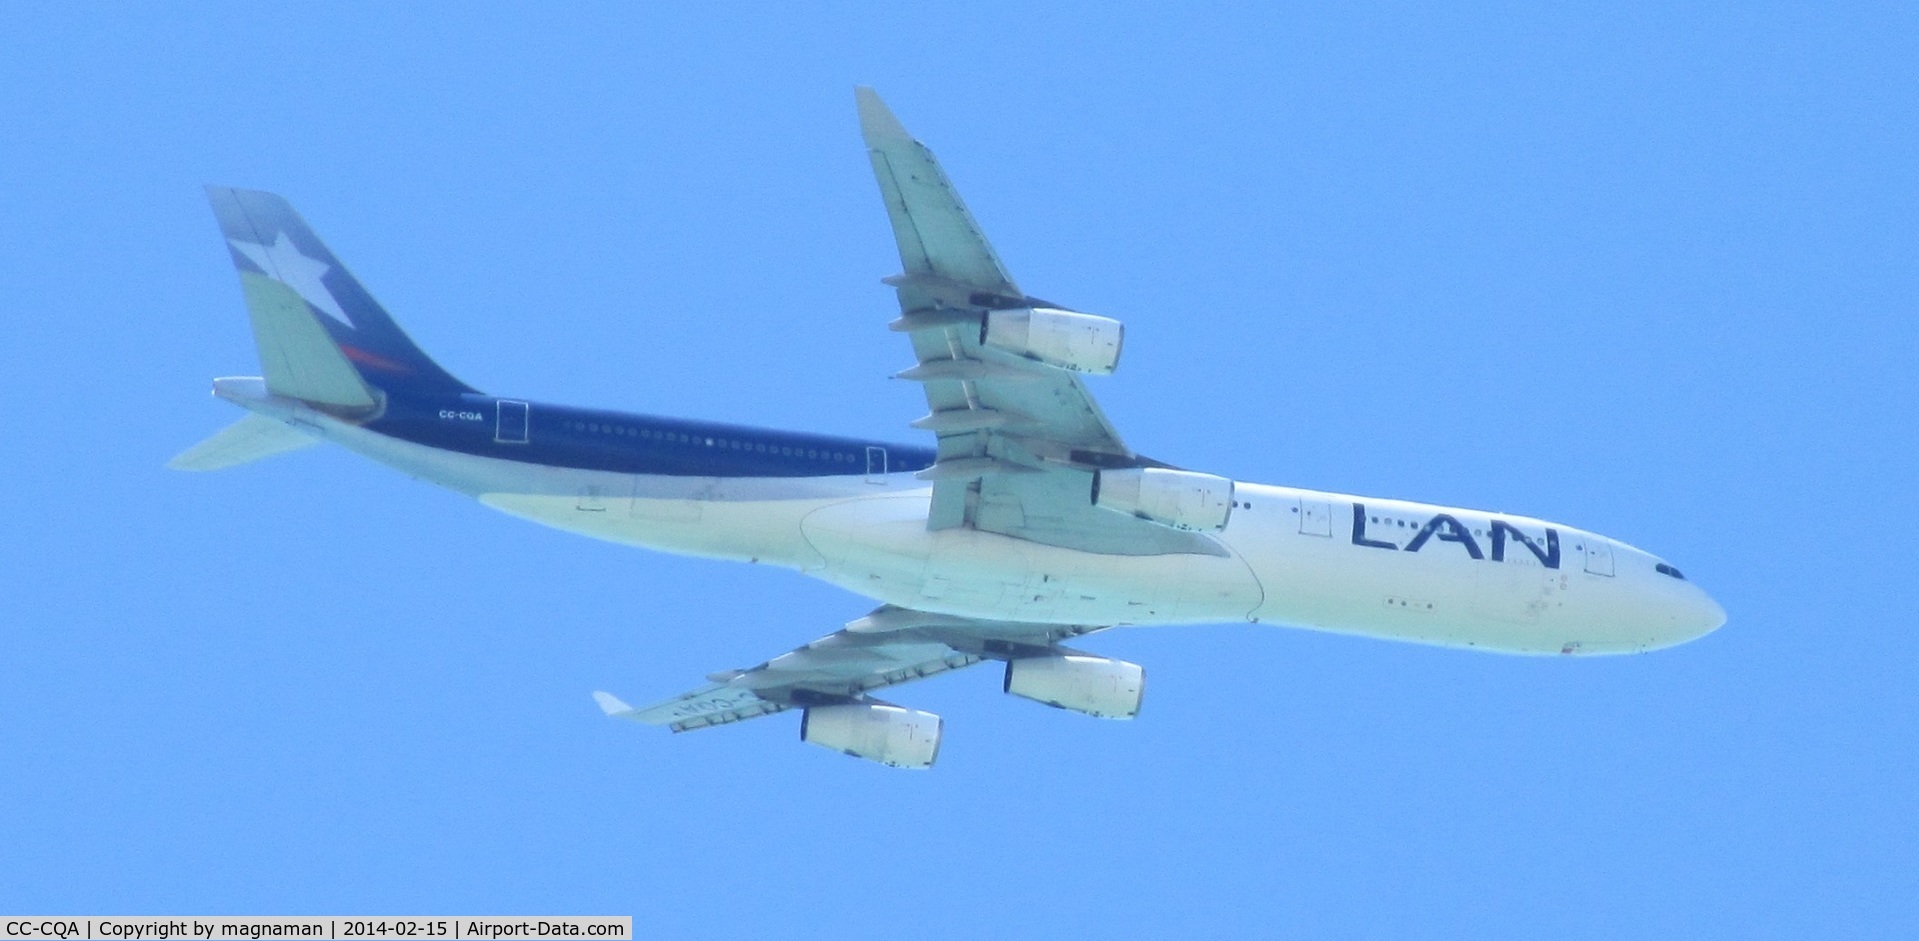 CC-CQA, 2000 Airbus A340-313X C/N 359, Flying over back garden at Mellons Bay on way into Auckland